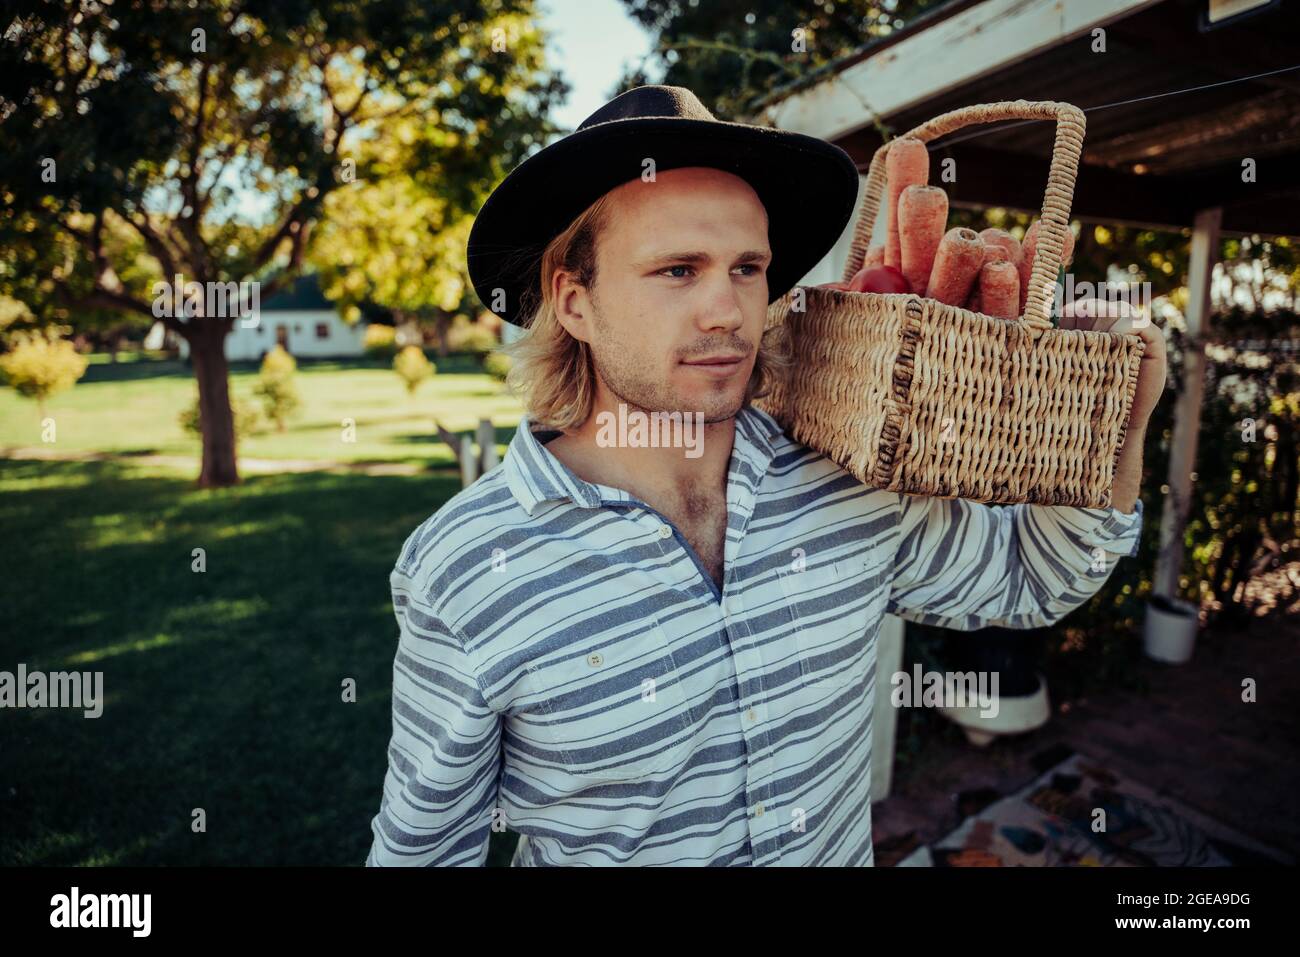 Handsome caucasian male focussed walking through fields in farm village holding basket of fresh vegetables and fruit Stock Photo